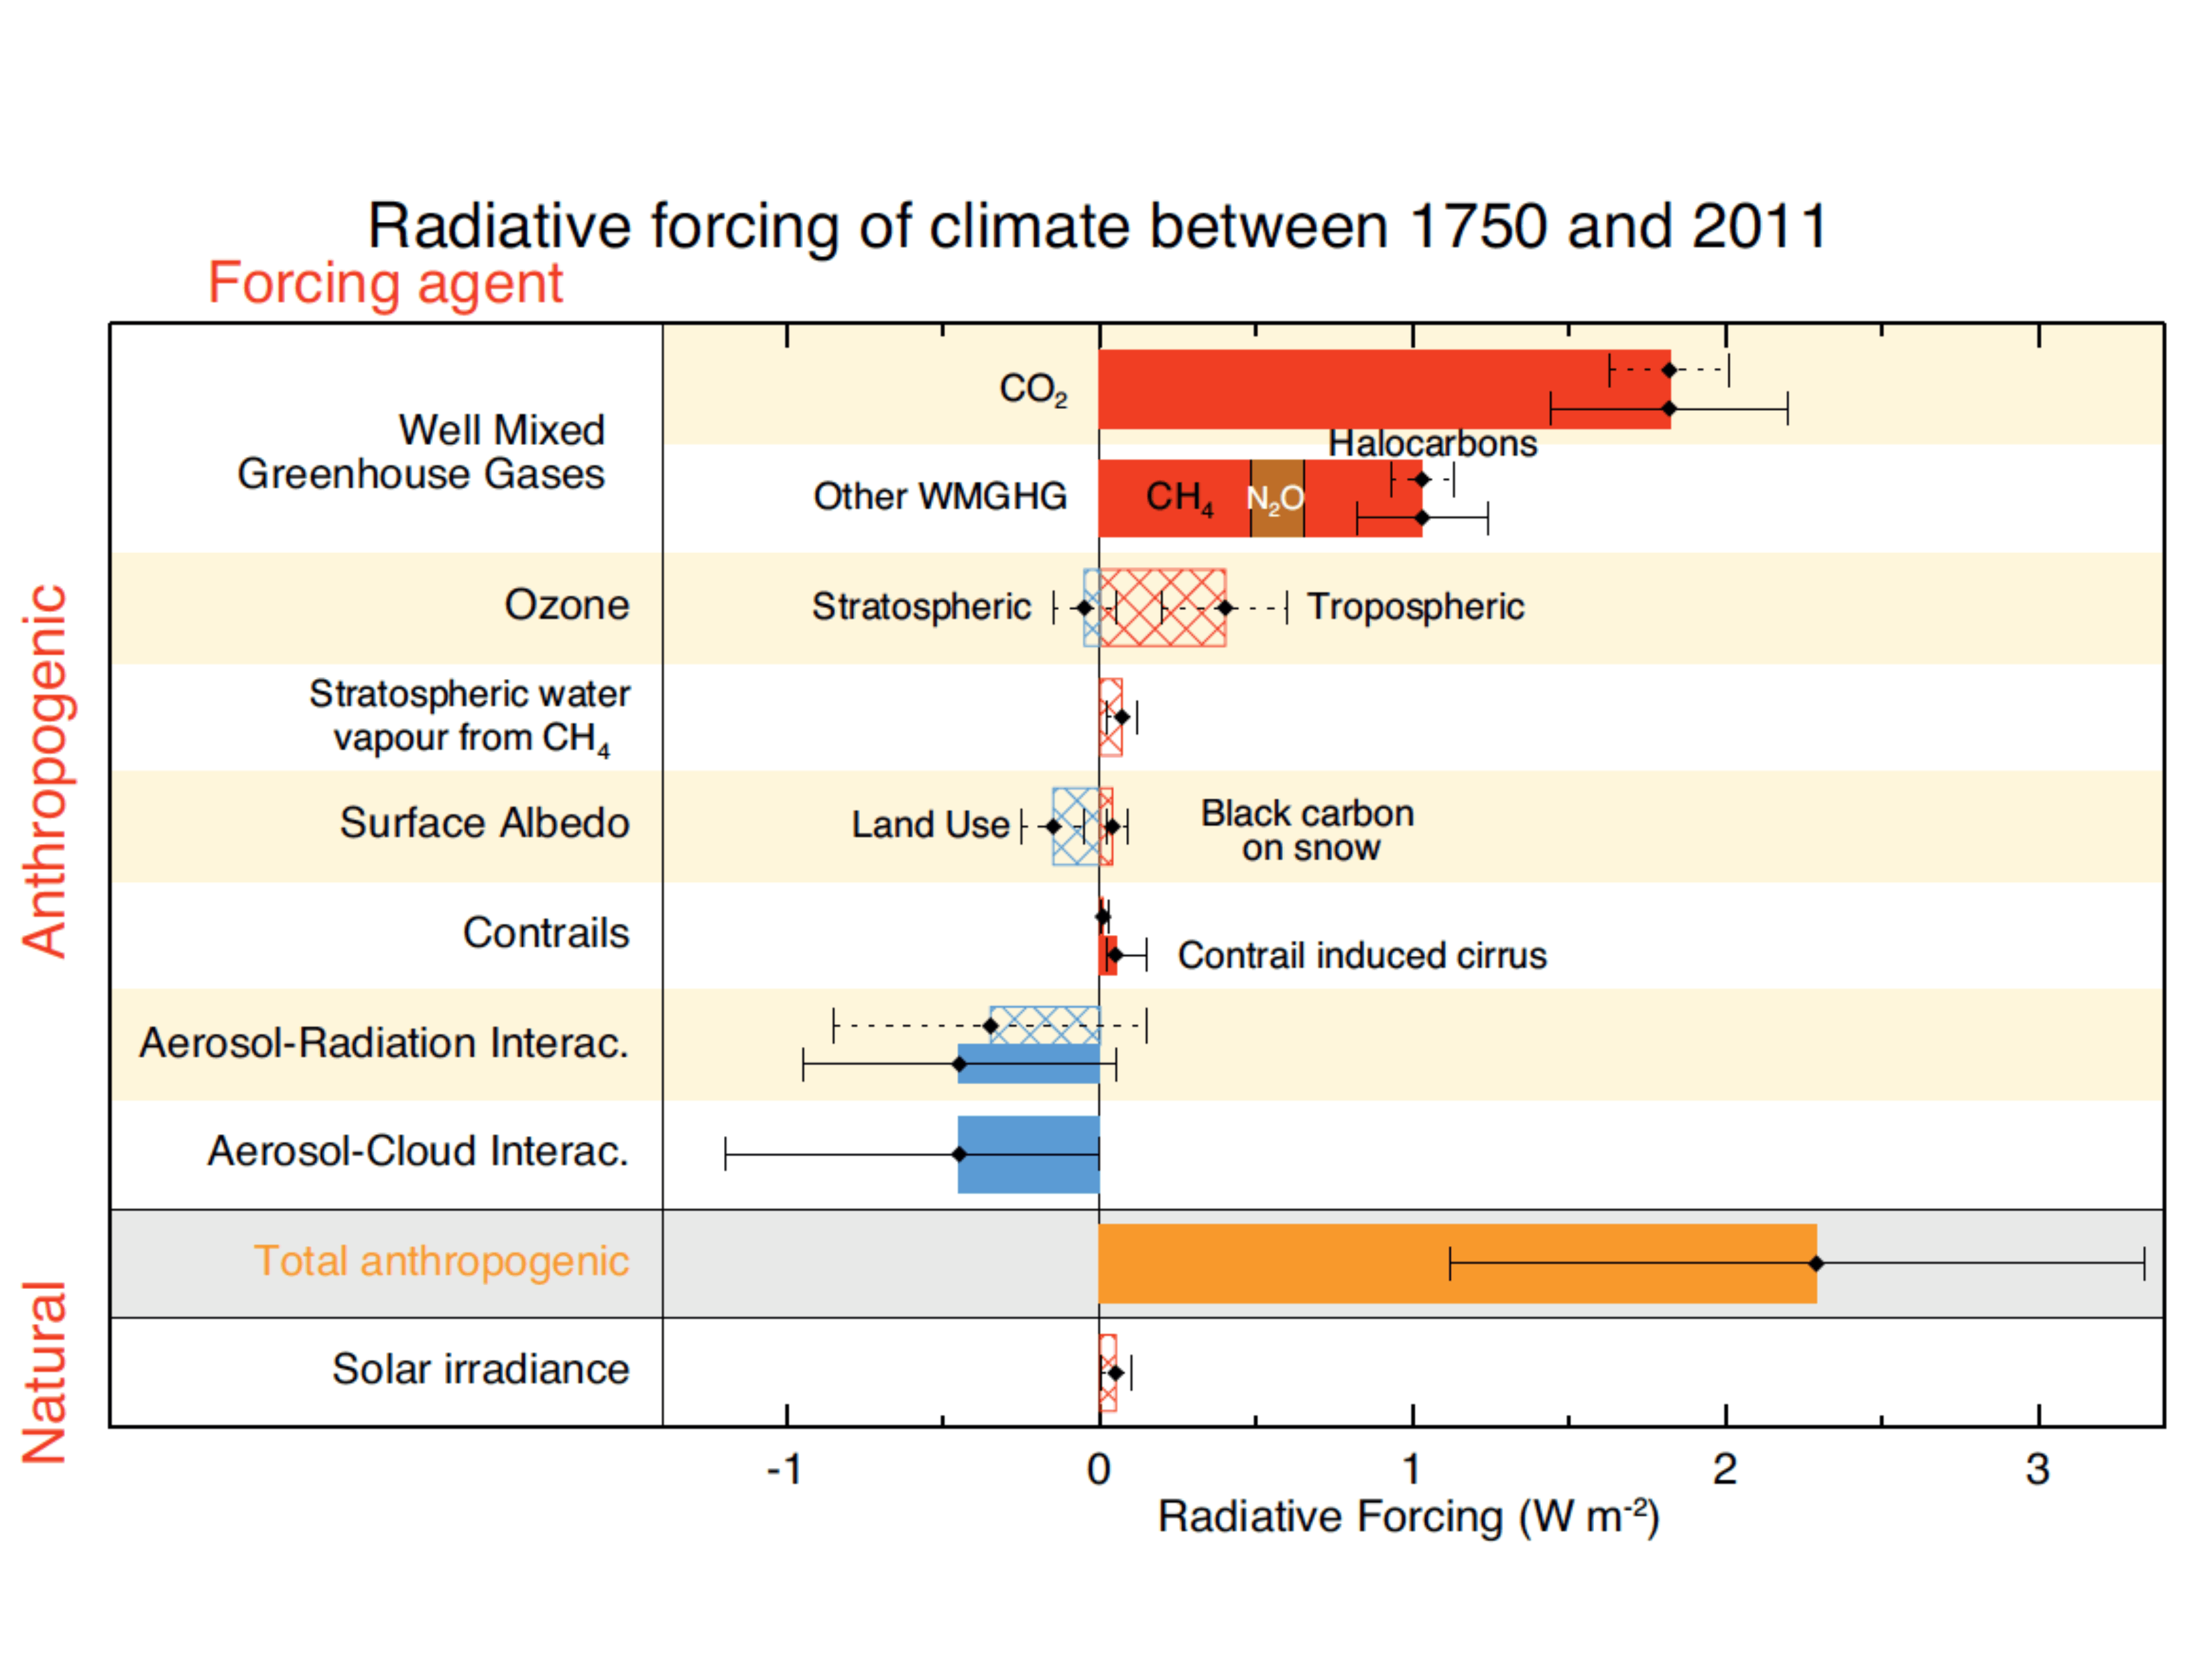 Summary of radiative forcings. From IPCC (2013). Hatched bars denote low confidence and scientific understanding.